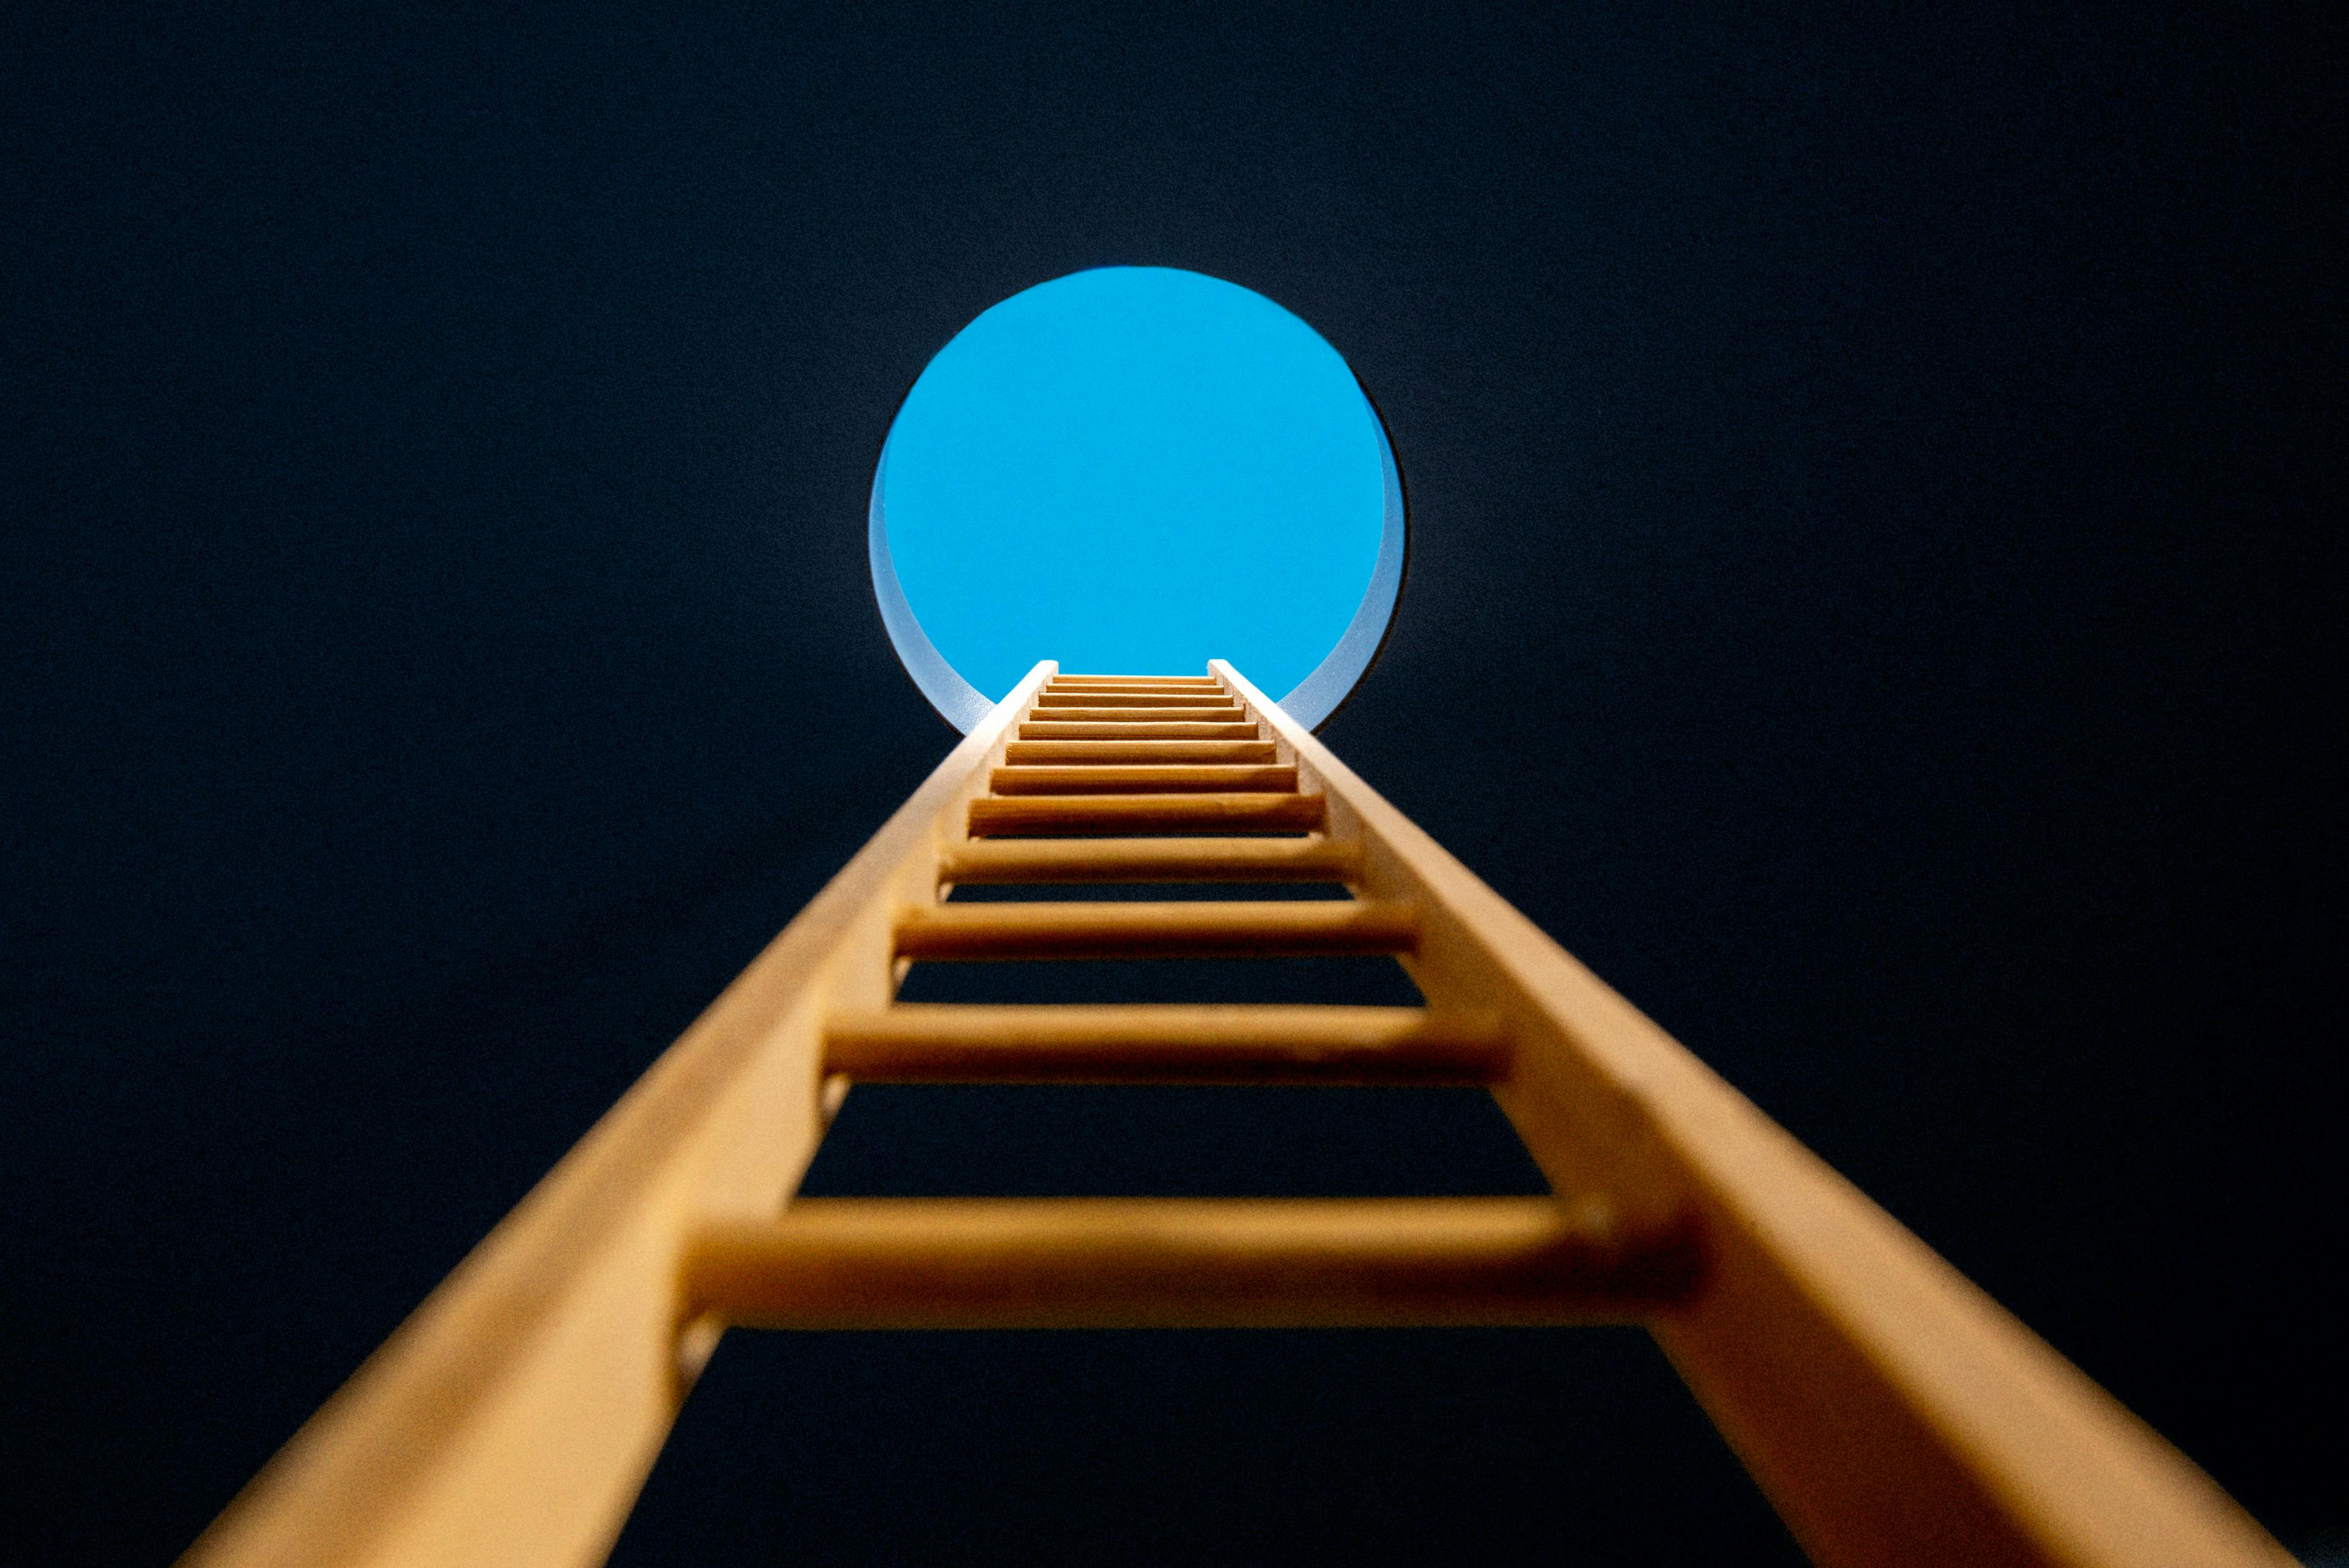 Ladder leading up to a hole showing a blue sky